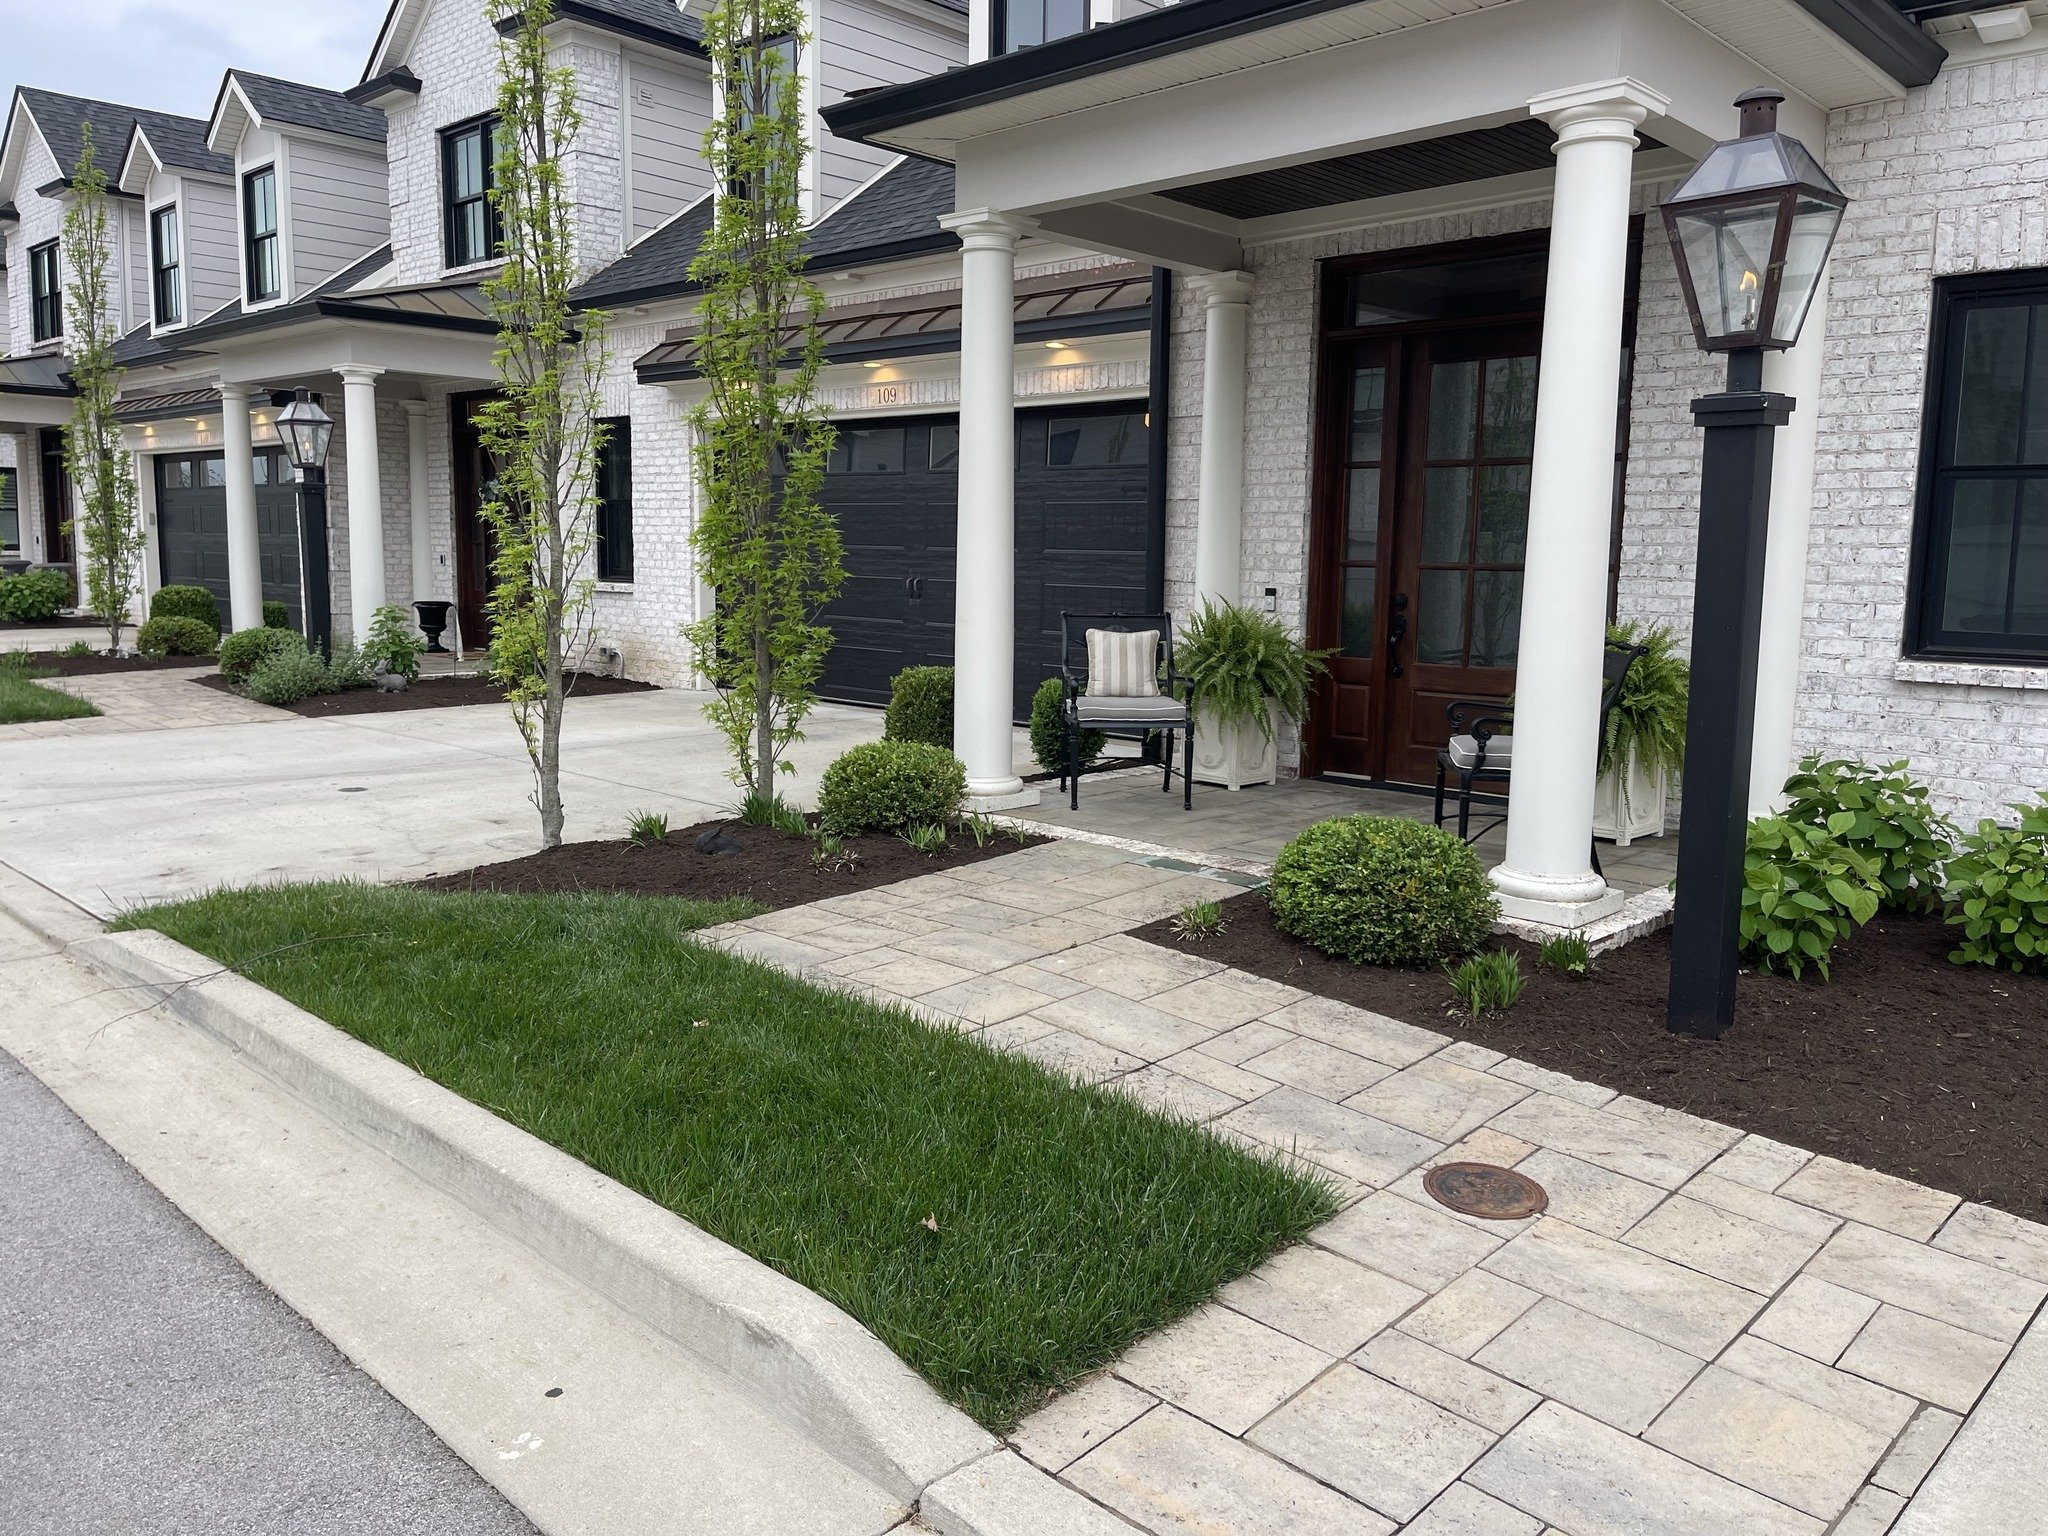 We do the landscaping, you get ready for company and enjoy the weekend!

#lexingtonlandscaper 
#lexingtonlandscapearchitect 
#curbappeal
#landscapedesign 
#frontwalkway 
#paverwalk 
#sidewalk 
#frontlandsape
#landscaping 
#freshmulch